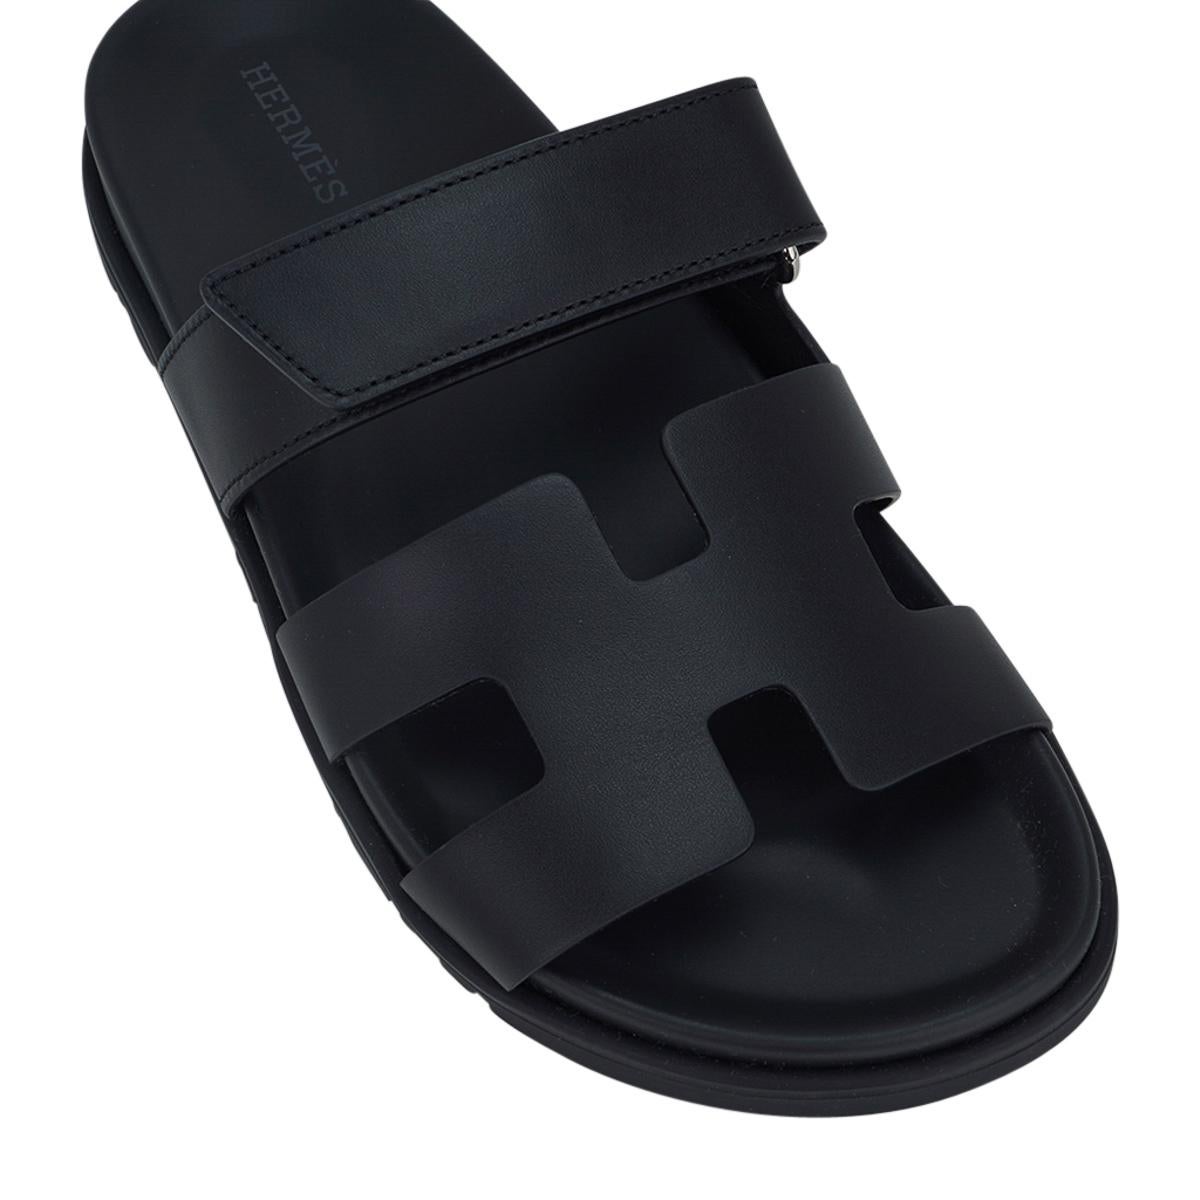 Mightychic offers a pair of limited edition Hermes Chypre sandals featured in Black.
Calfskin with black anatomical insole and H embossed Black rubber sole.
Strap across foot is adjustable with velcro closure.
Comes with sleepers and and signature